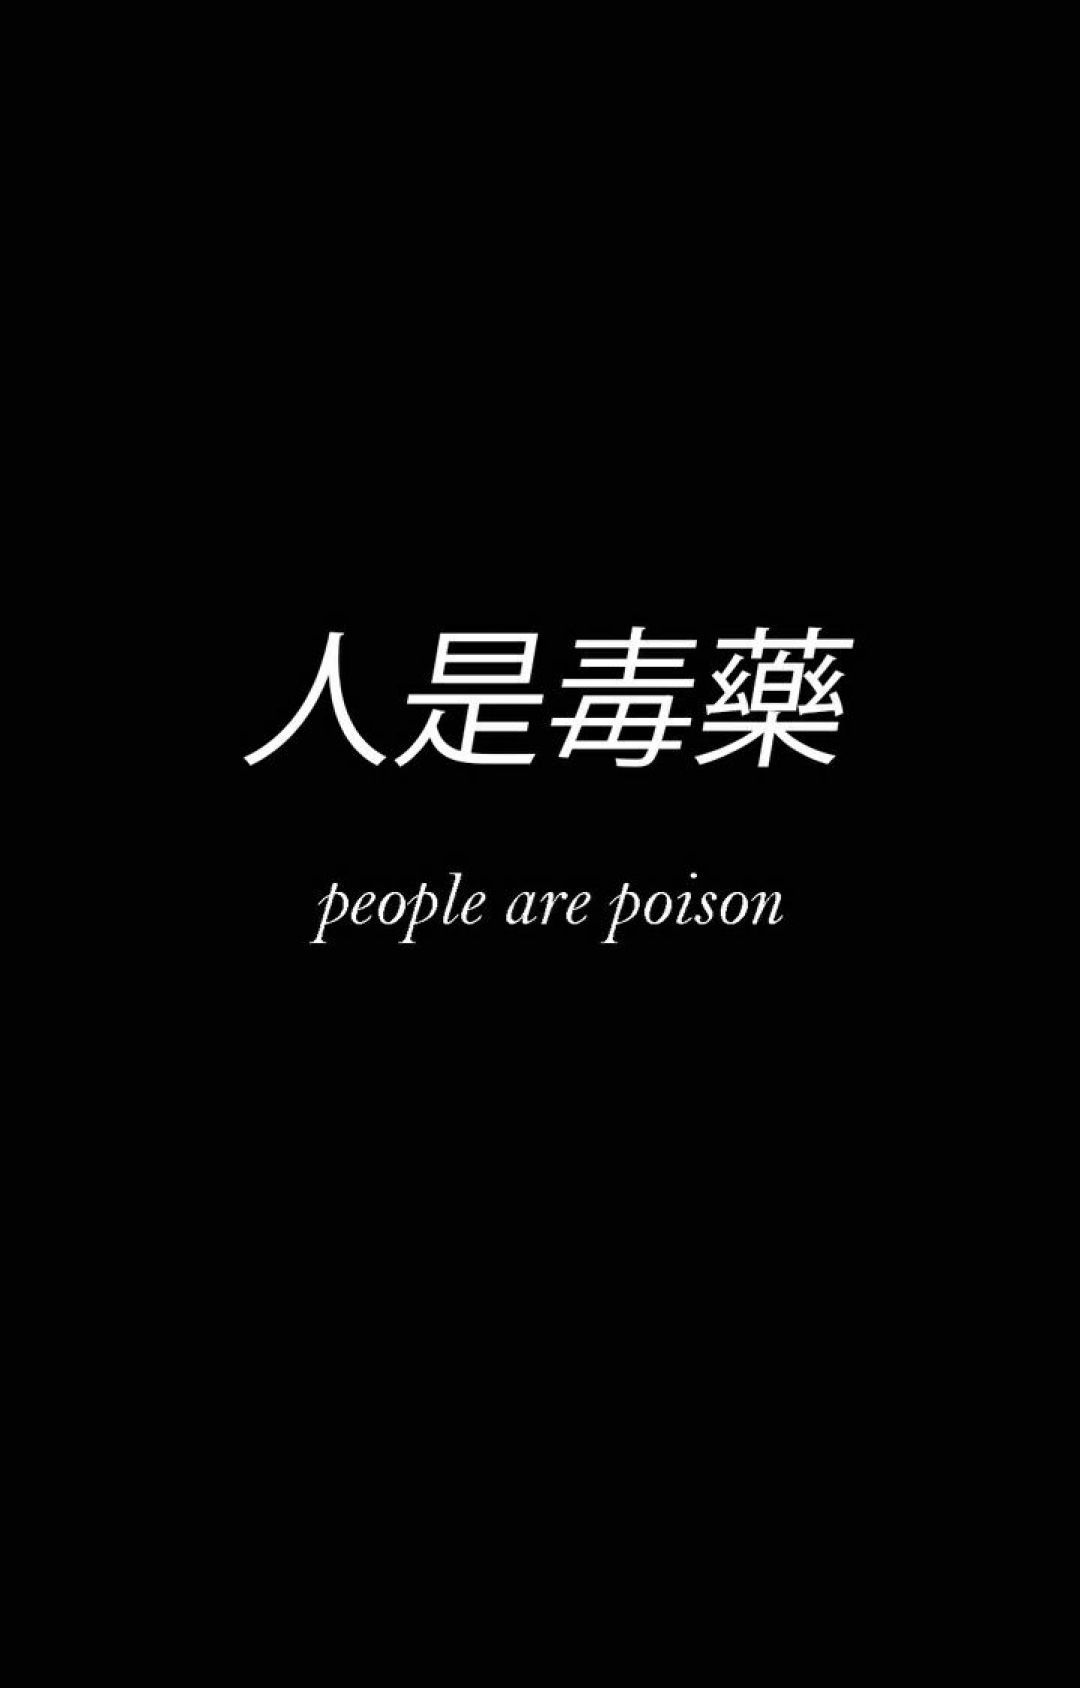 A black background with white Chinese characters and English characters below it. - Android, Japanese